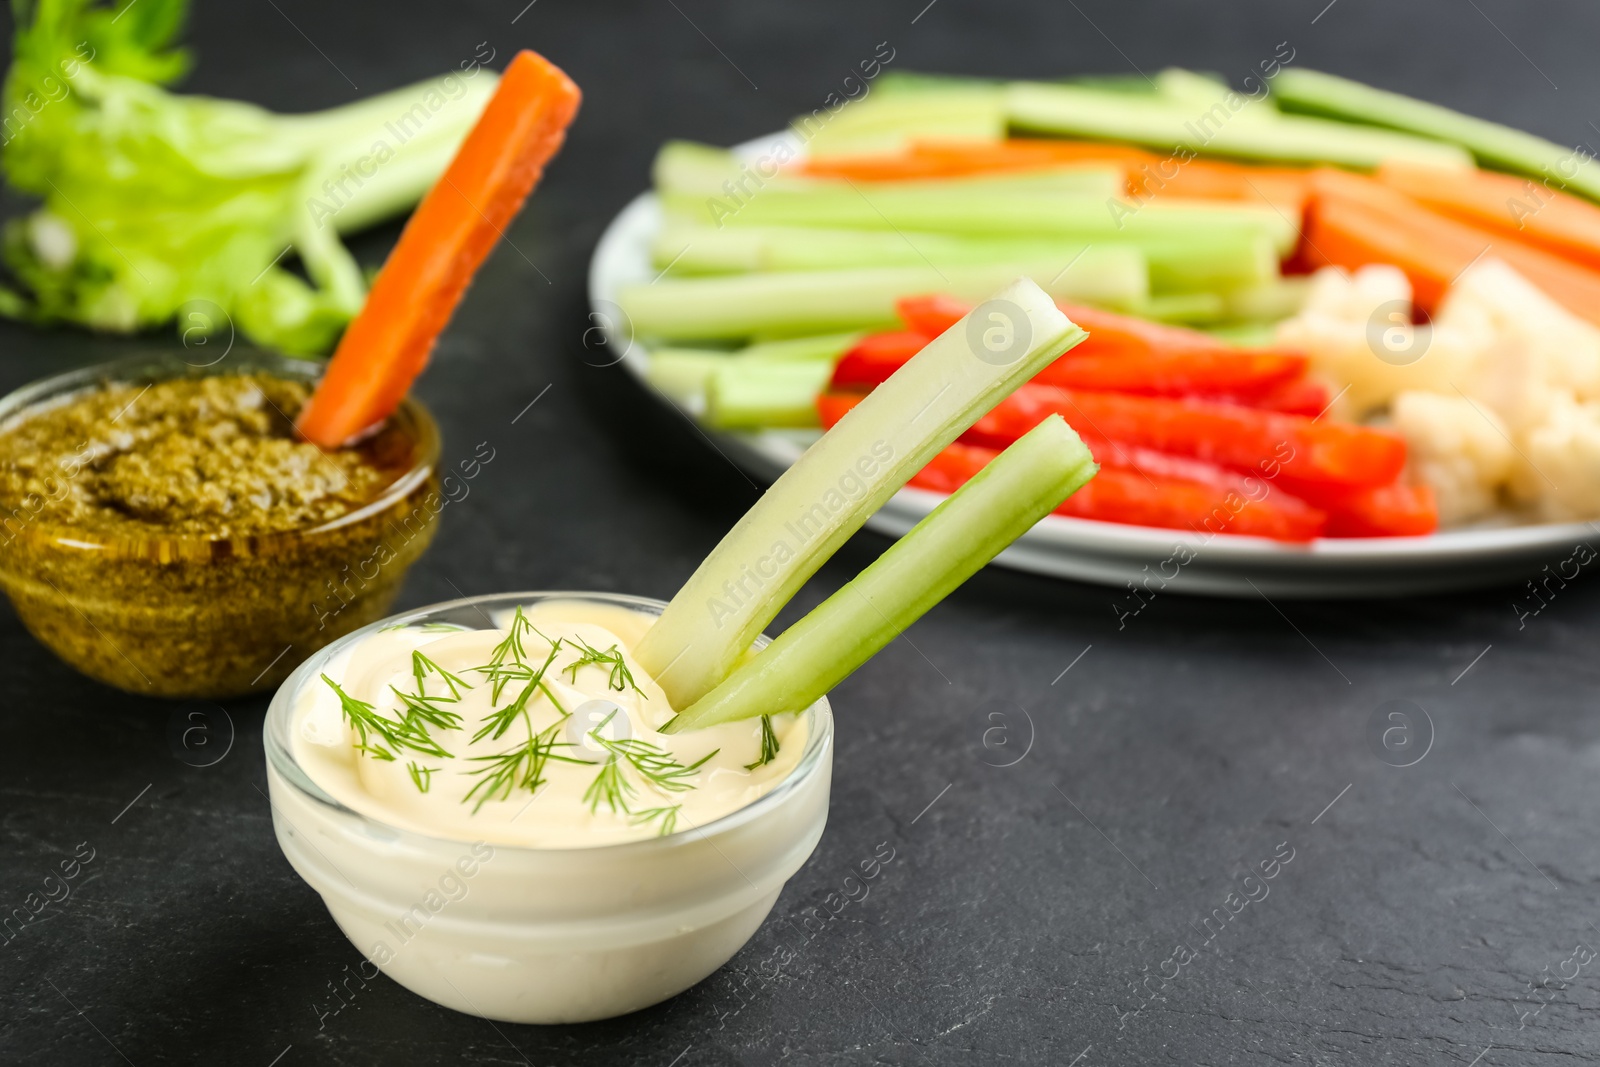 Photo of Celery sticks with dip sauce in glass bowl on black table